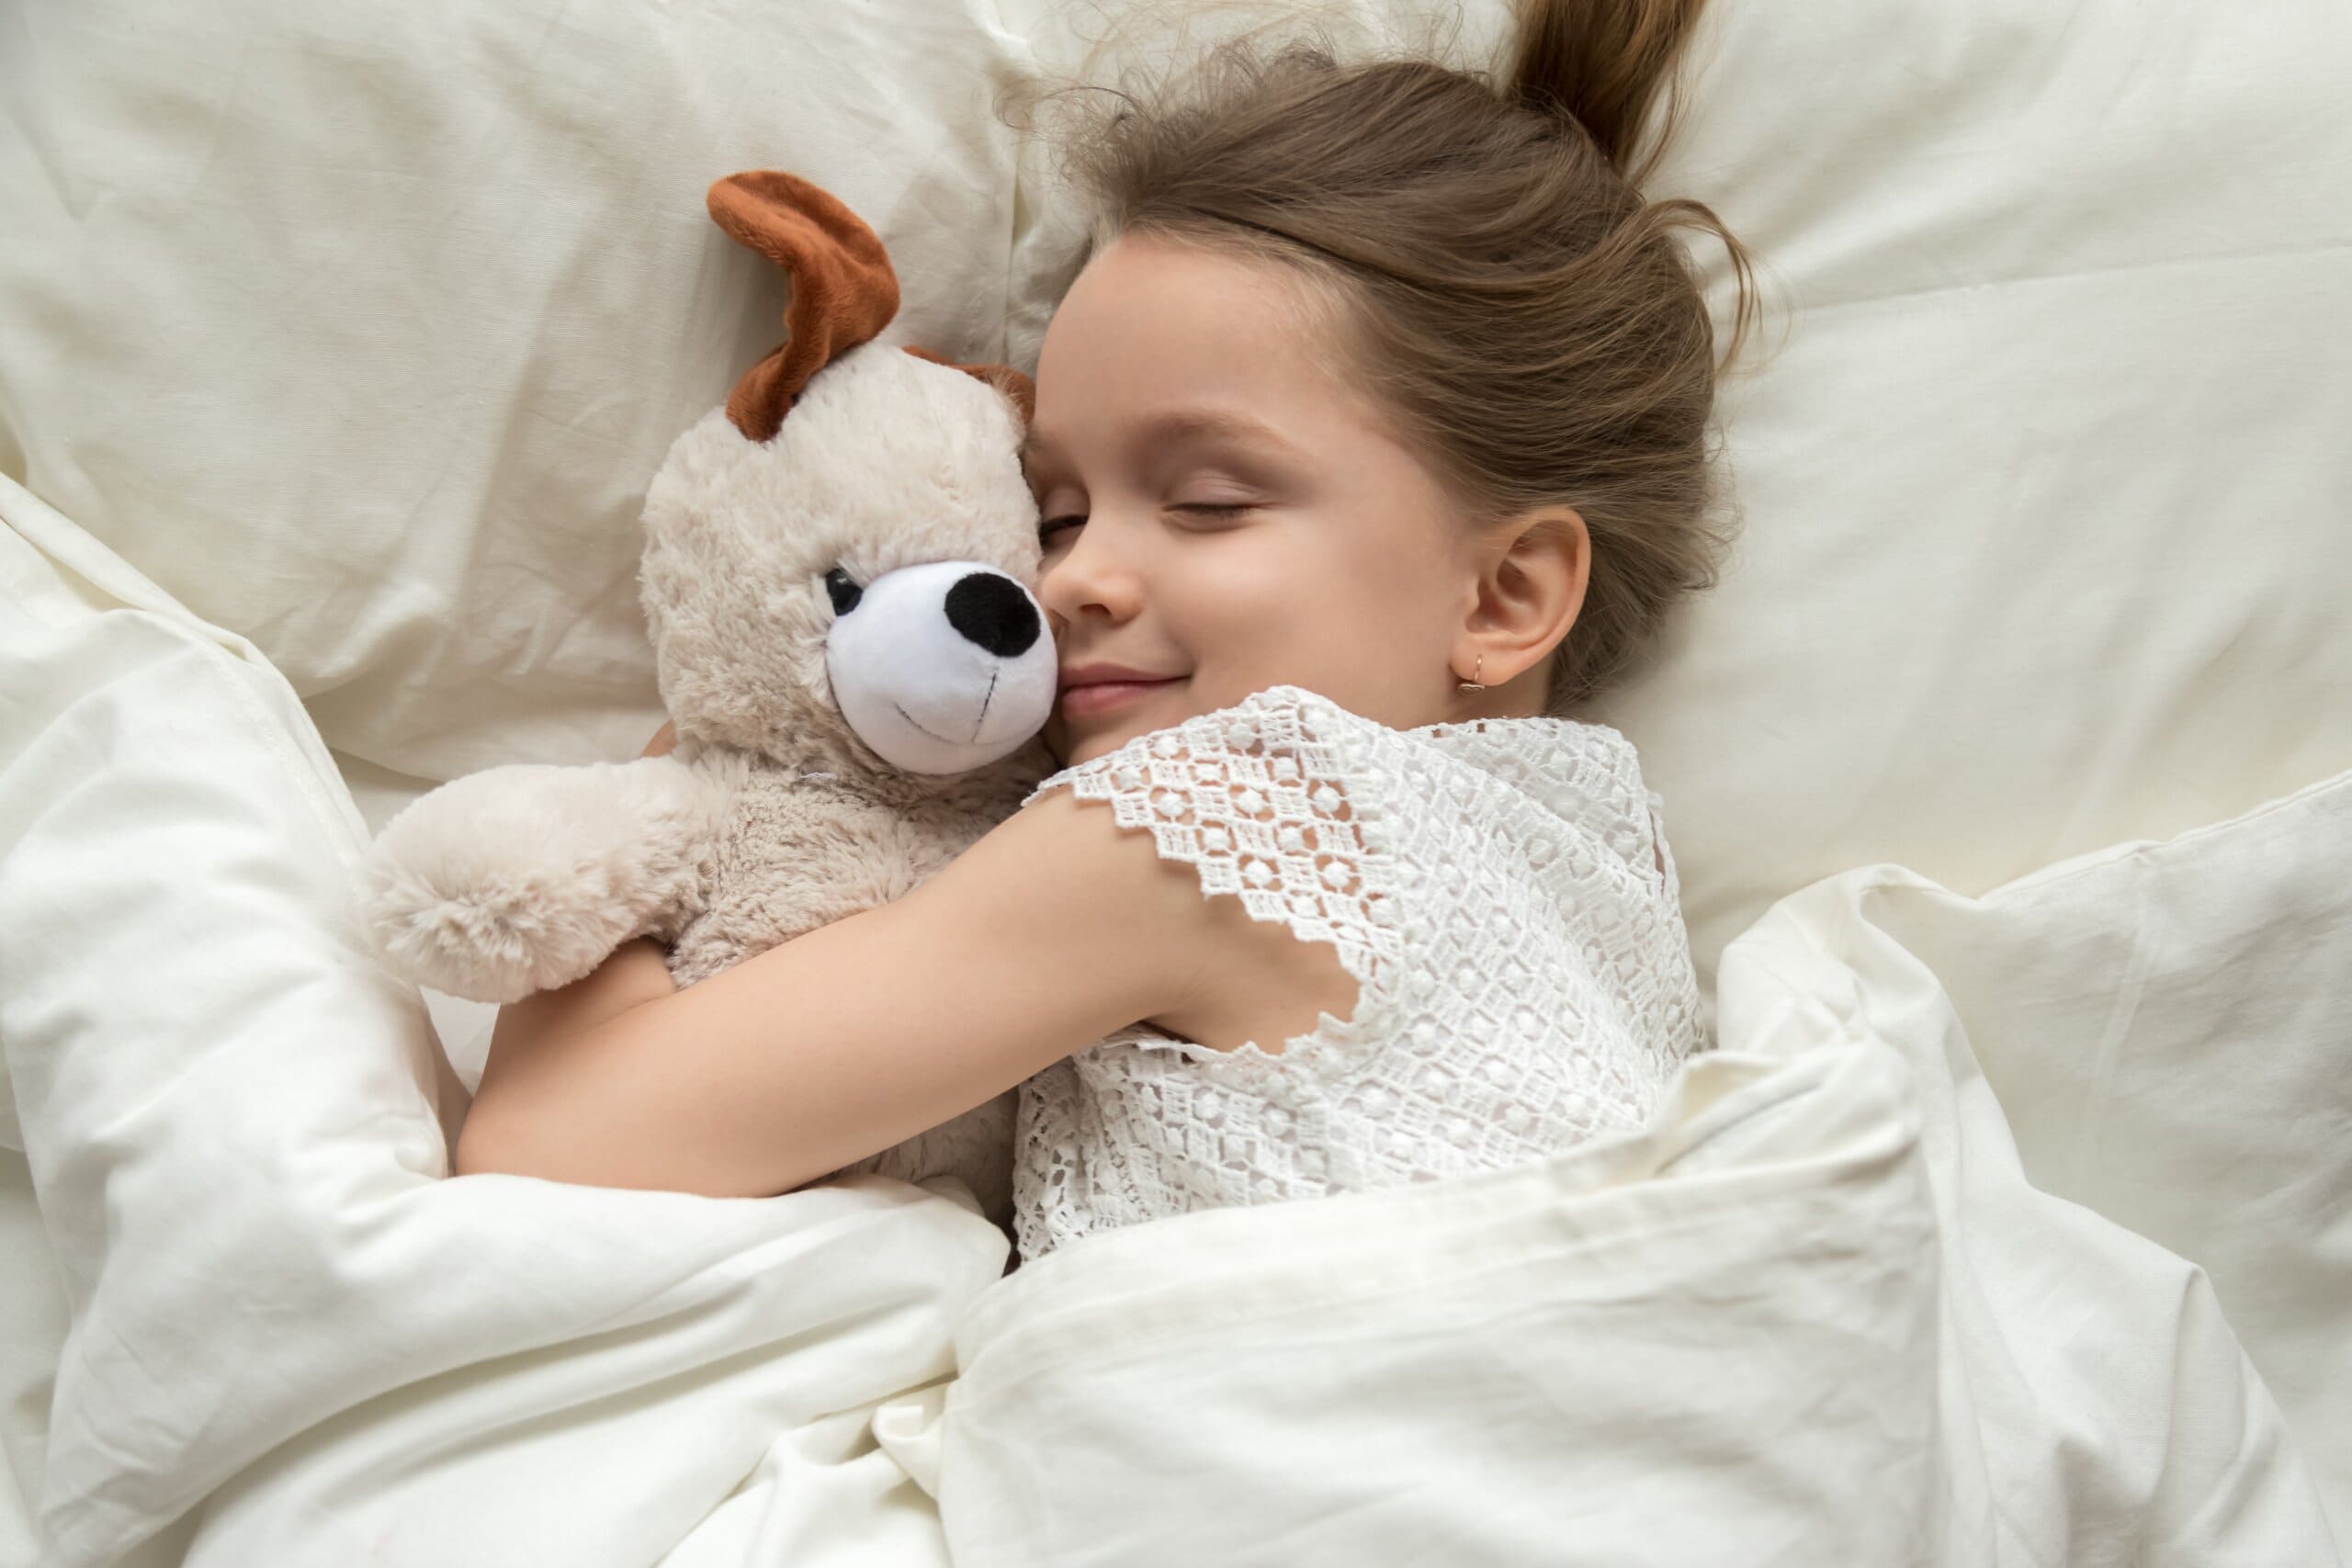 Little girl hugging her teddy bear smiling in bed with white covers over her.